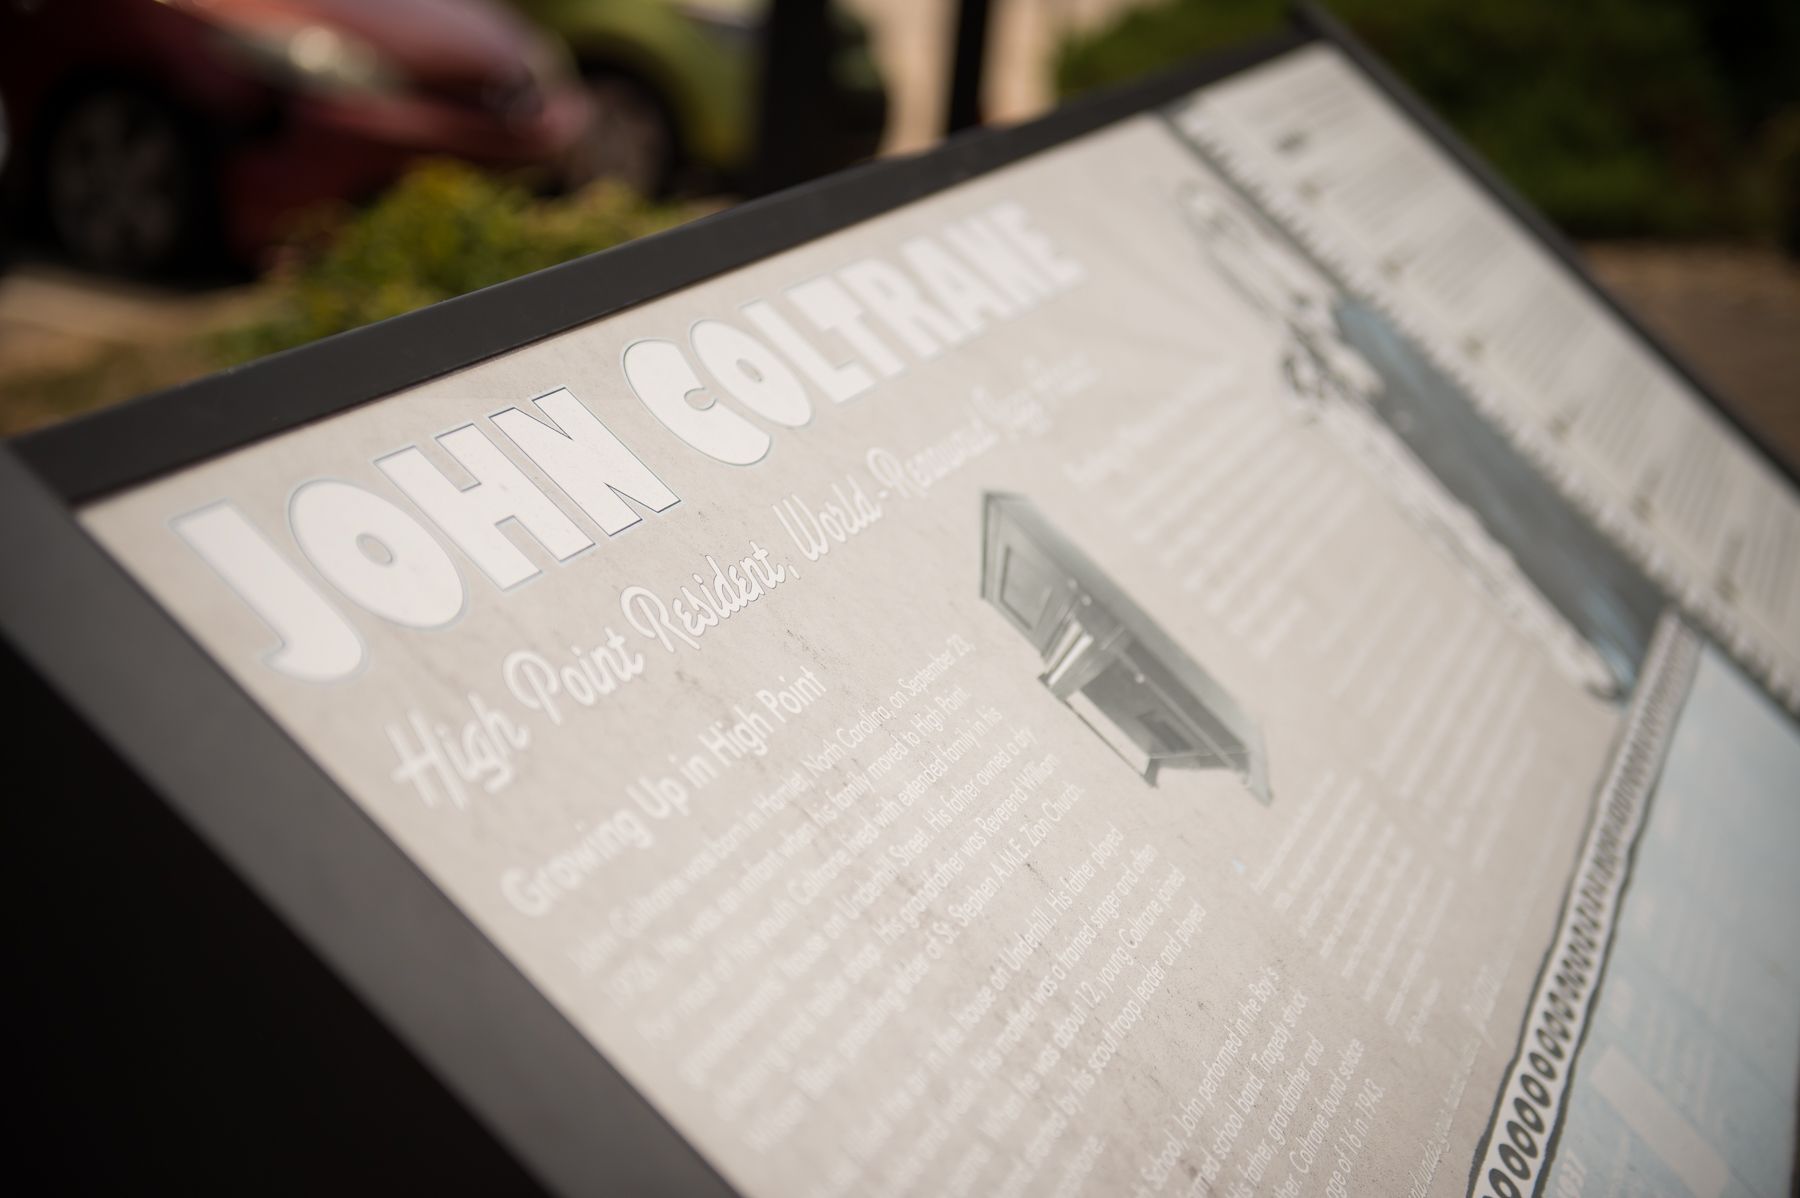 A monument describing the impact of High Point, NC on John Coltrane's childhood.